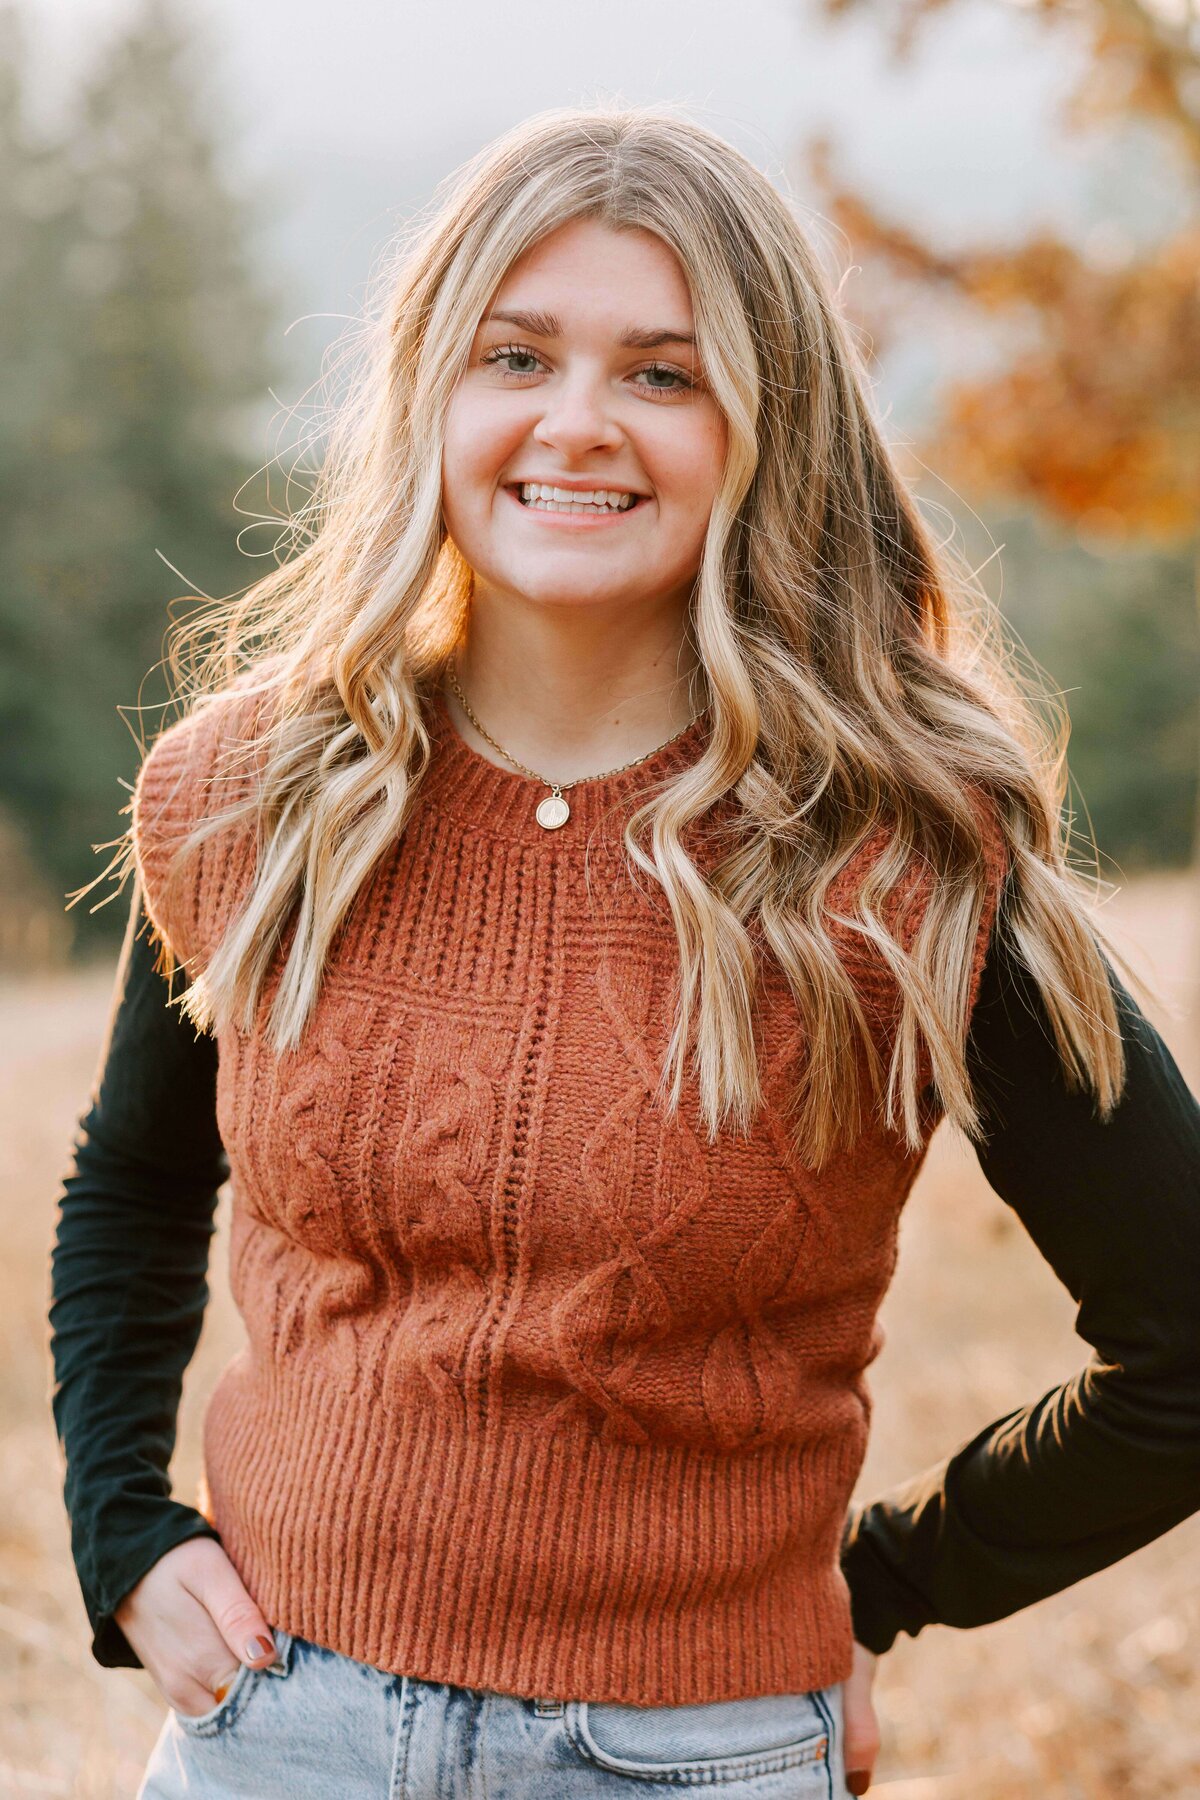 A teenage girl in a brown sweater with her hand on her hip smiles Fitton Green Corvallis OR Senior photography